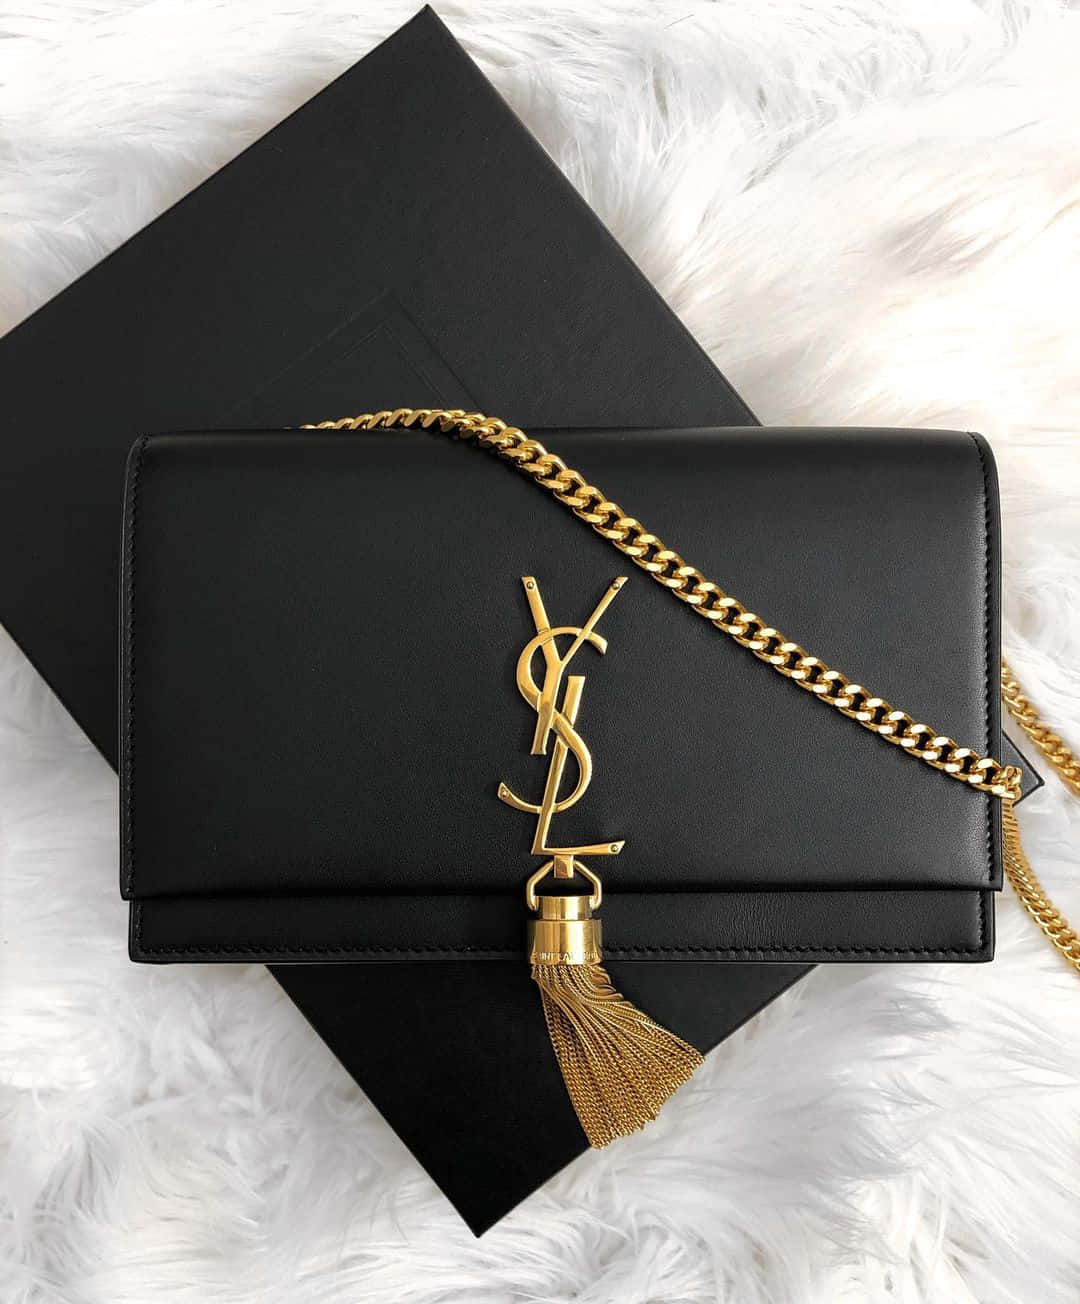 "Reflect your personality and style through YSL"